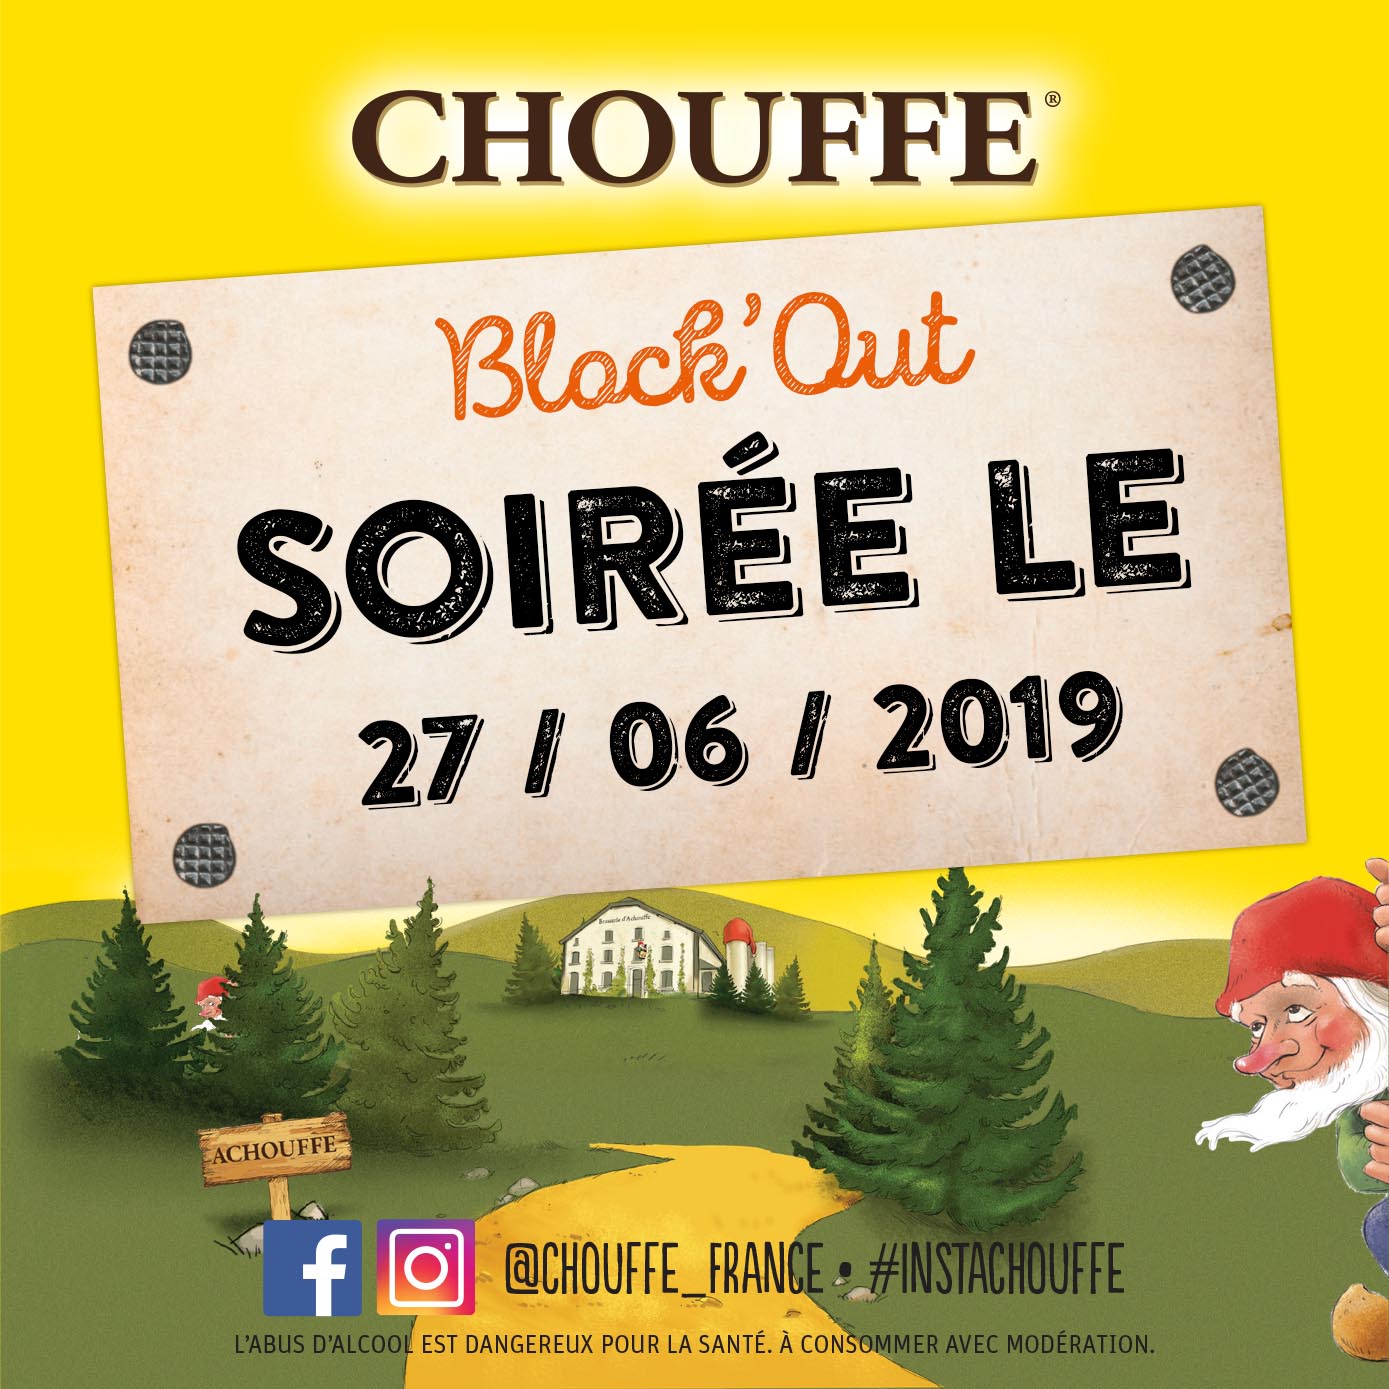 Block'Out Barbecue and Chouffe Party !!